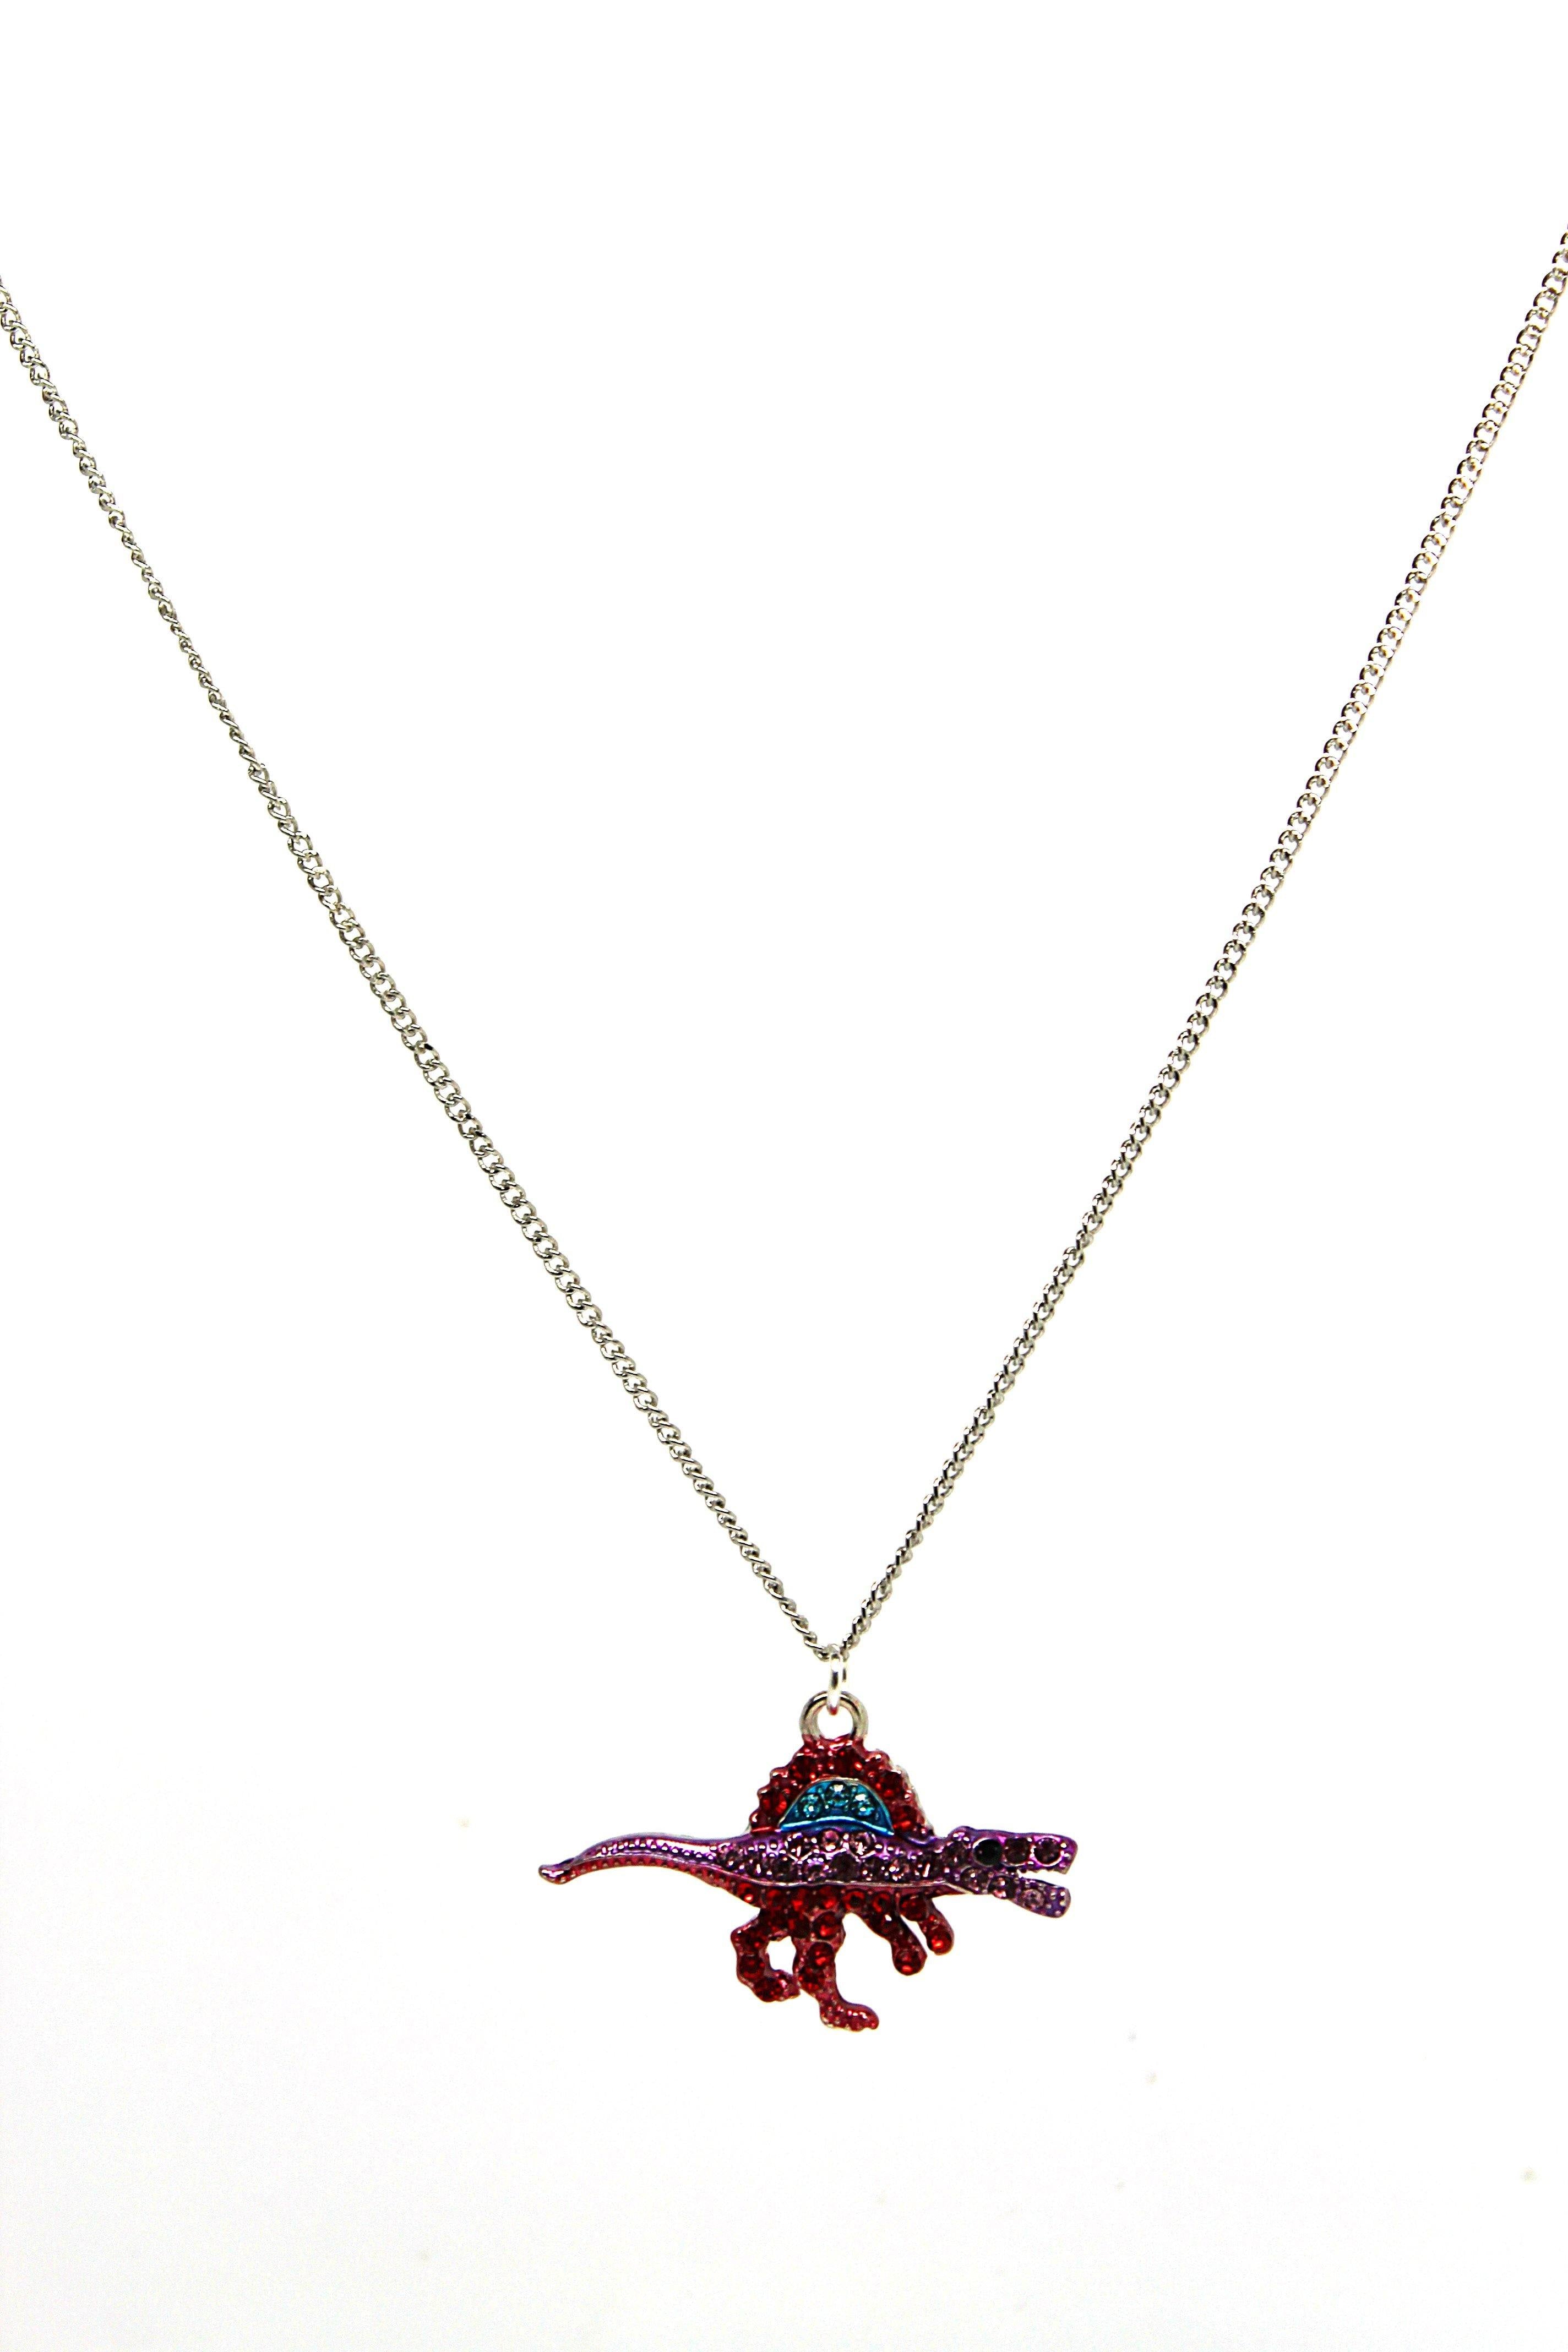 Spinosaurus Necklace - Wildtouch - Wildtouch